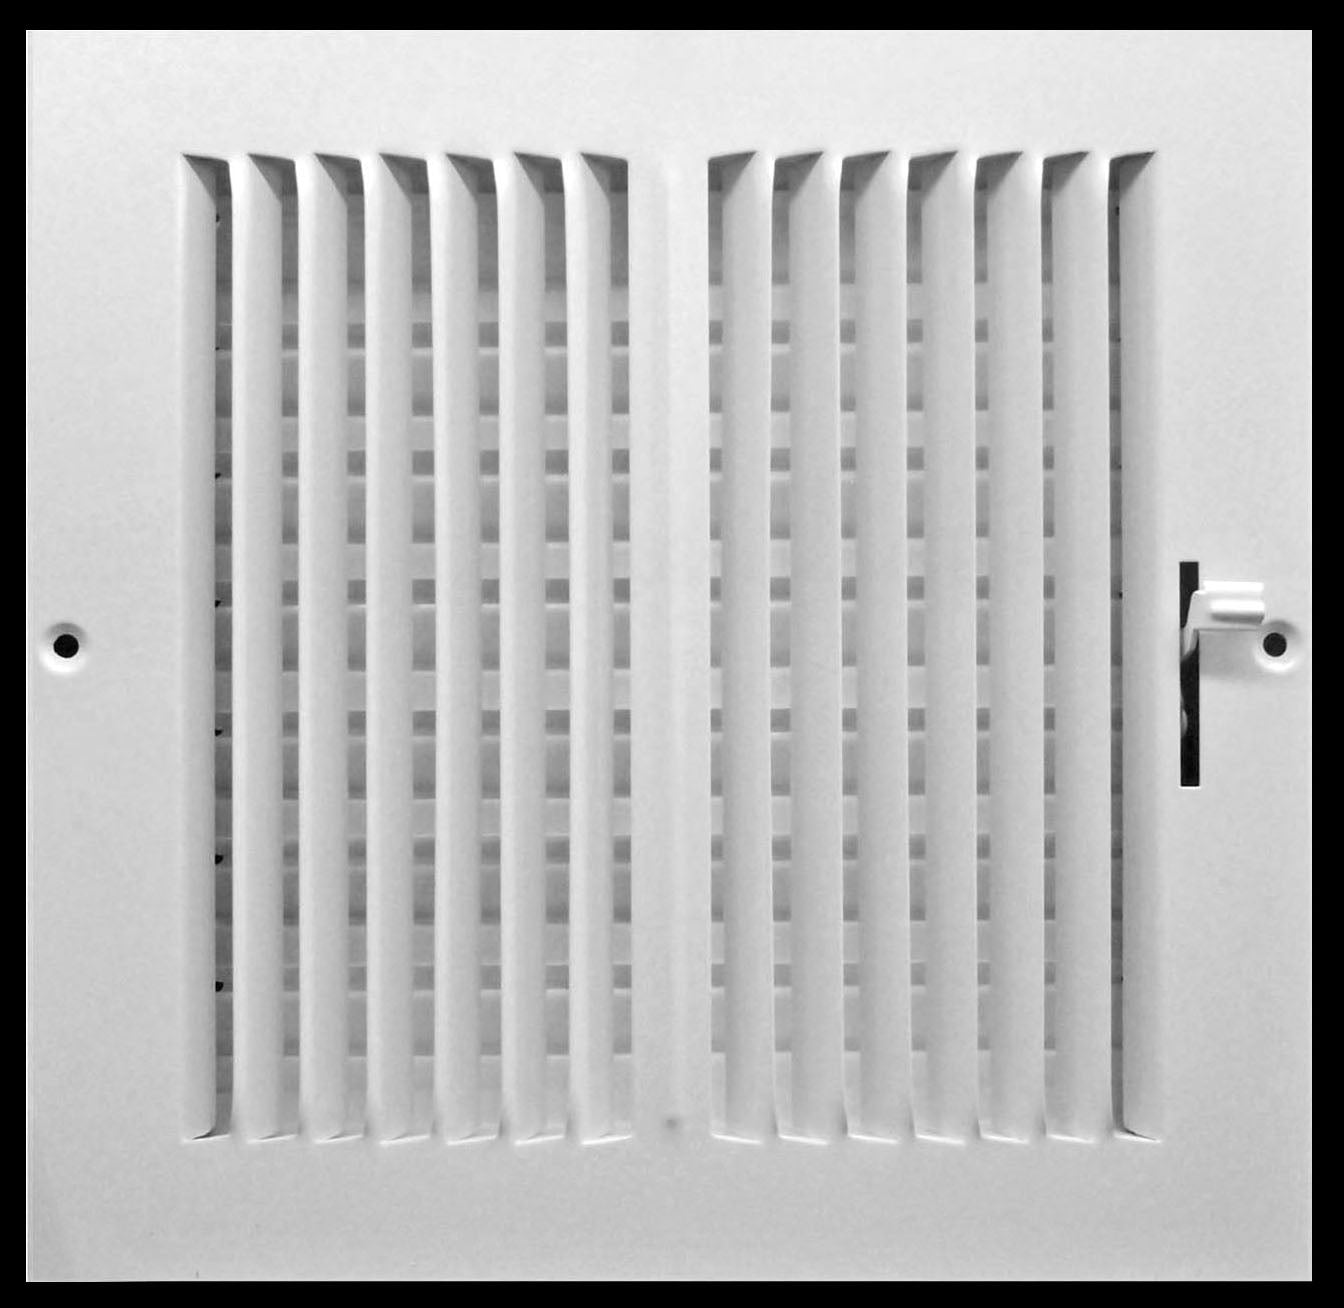 10" X 10" 2-Way Vertical AIR SUPPLY GRILLE - DUCT COVER & DIFFUSER - Flat Stamped Face